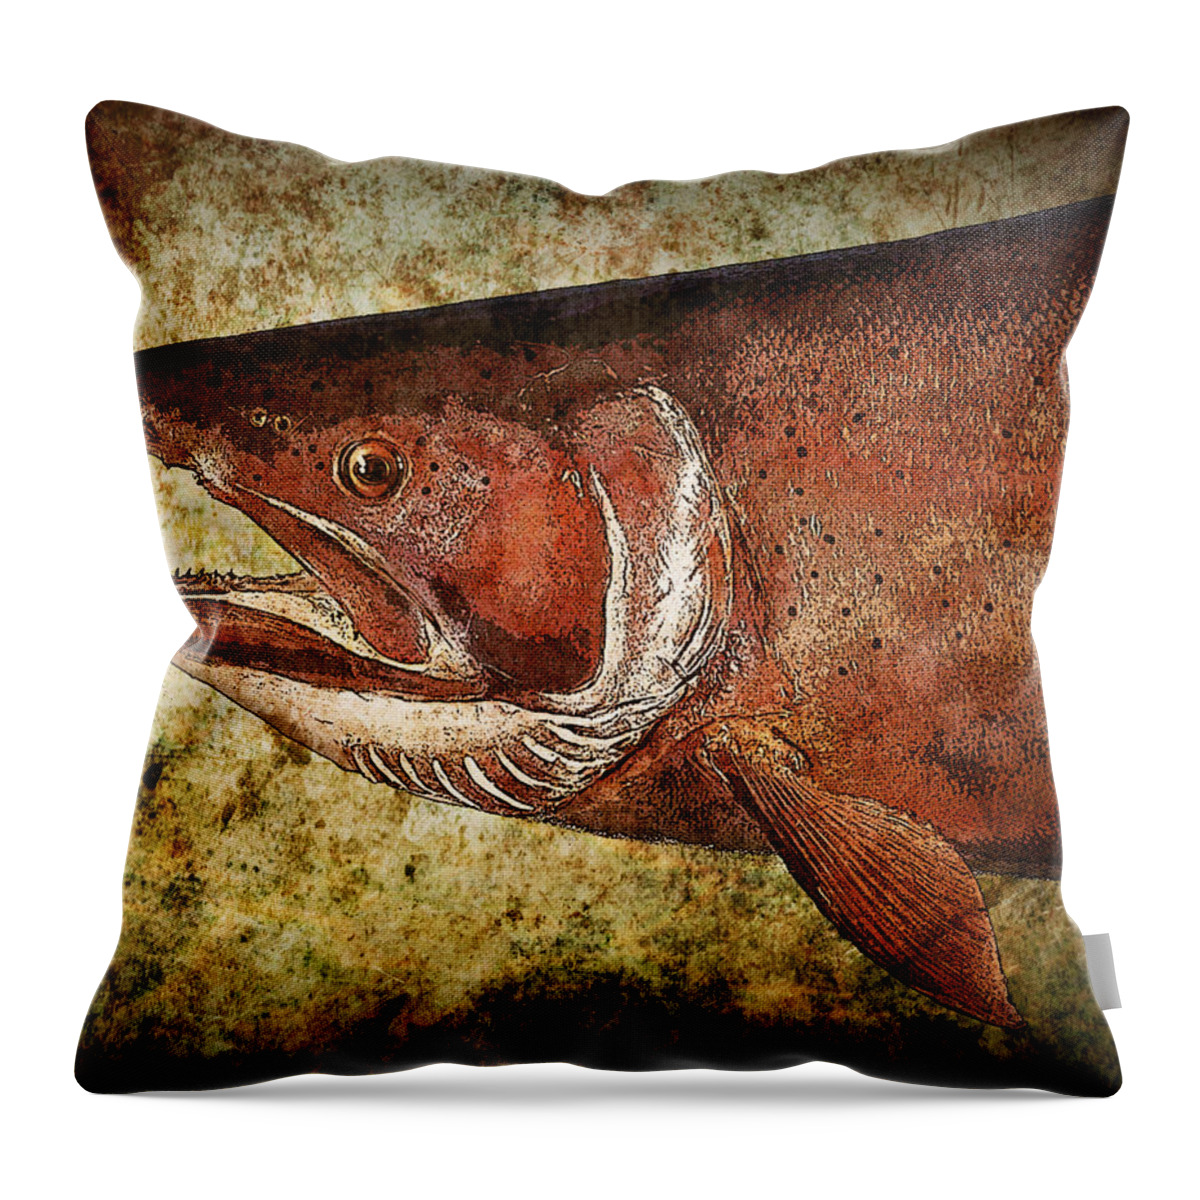 Art Throw Pillow featuring the photograph Steelhead Trout by Randall Nyhof